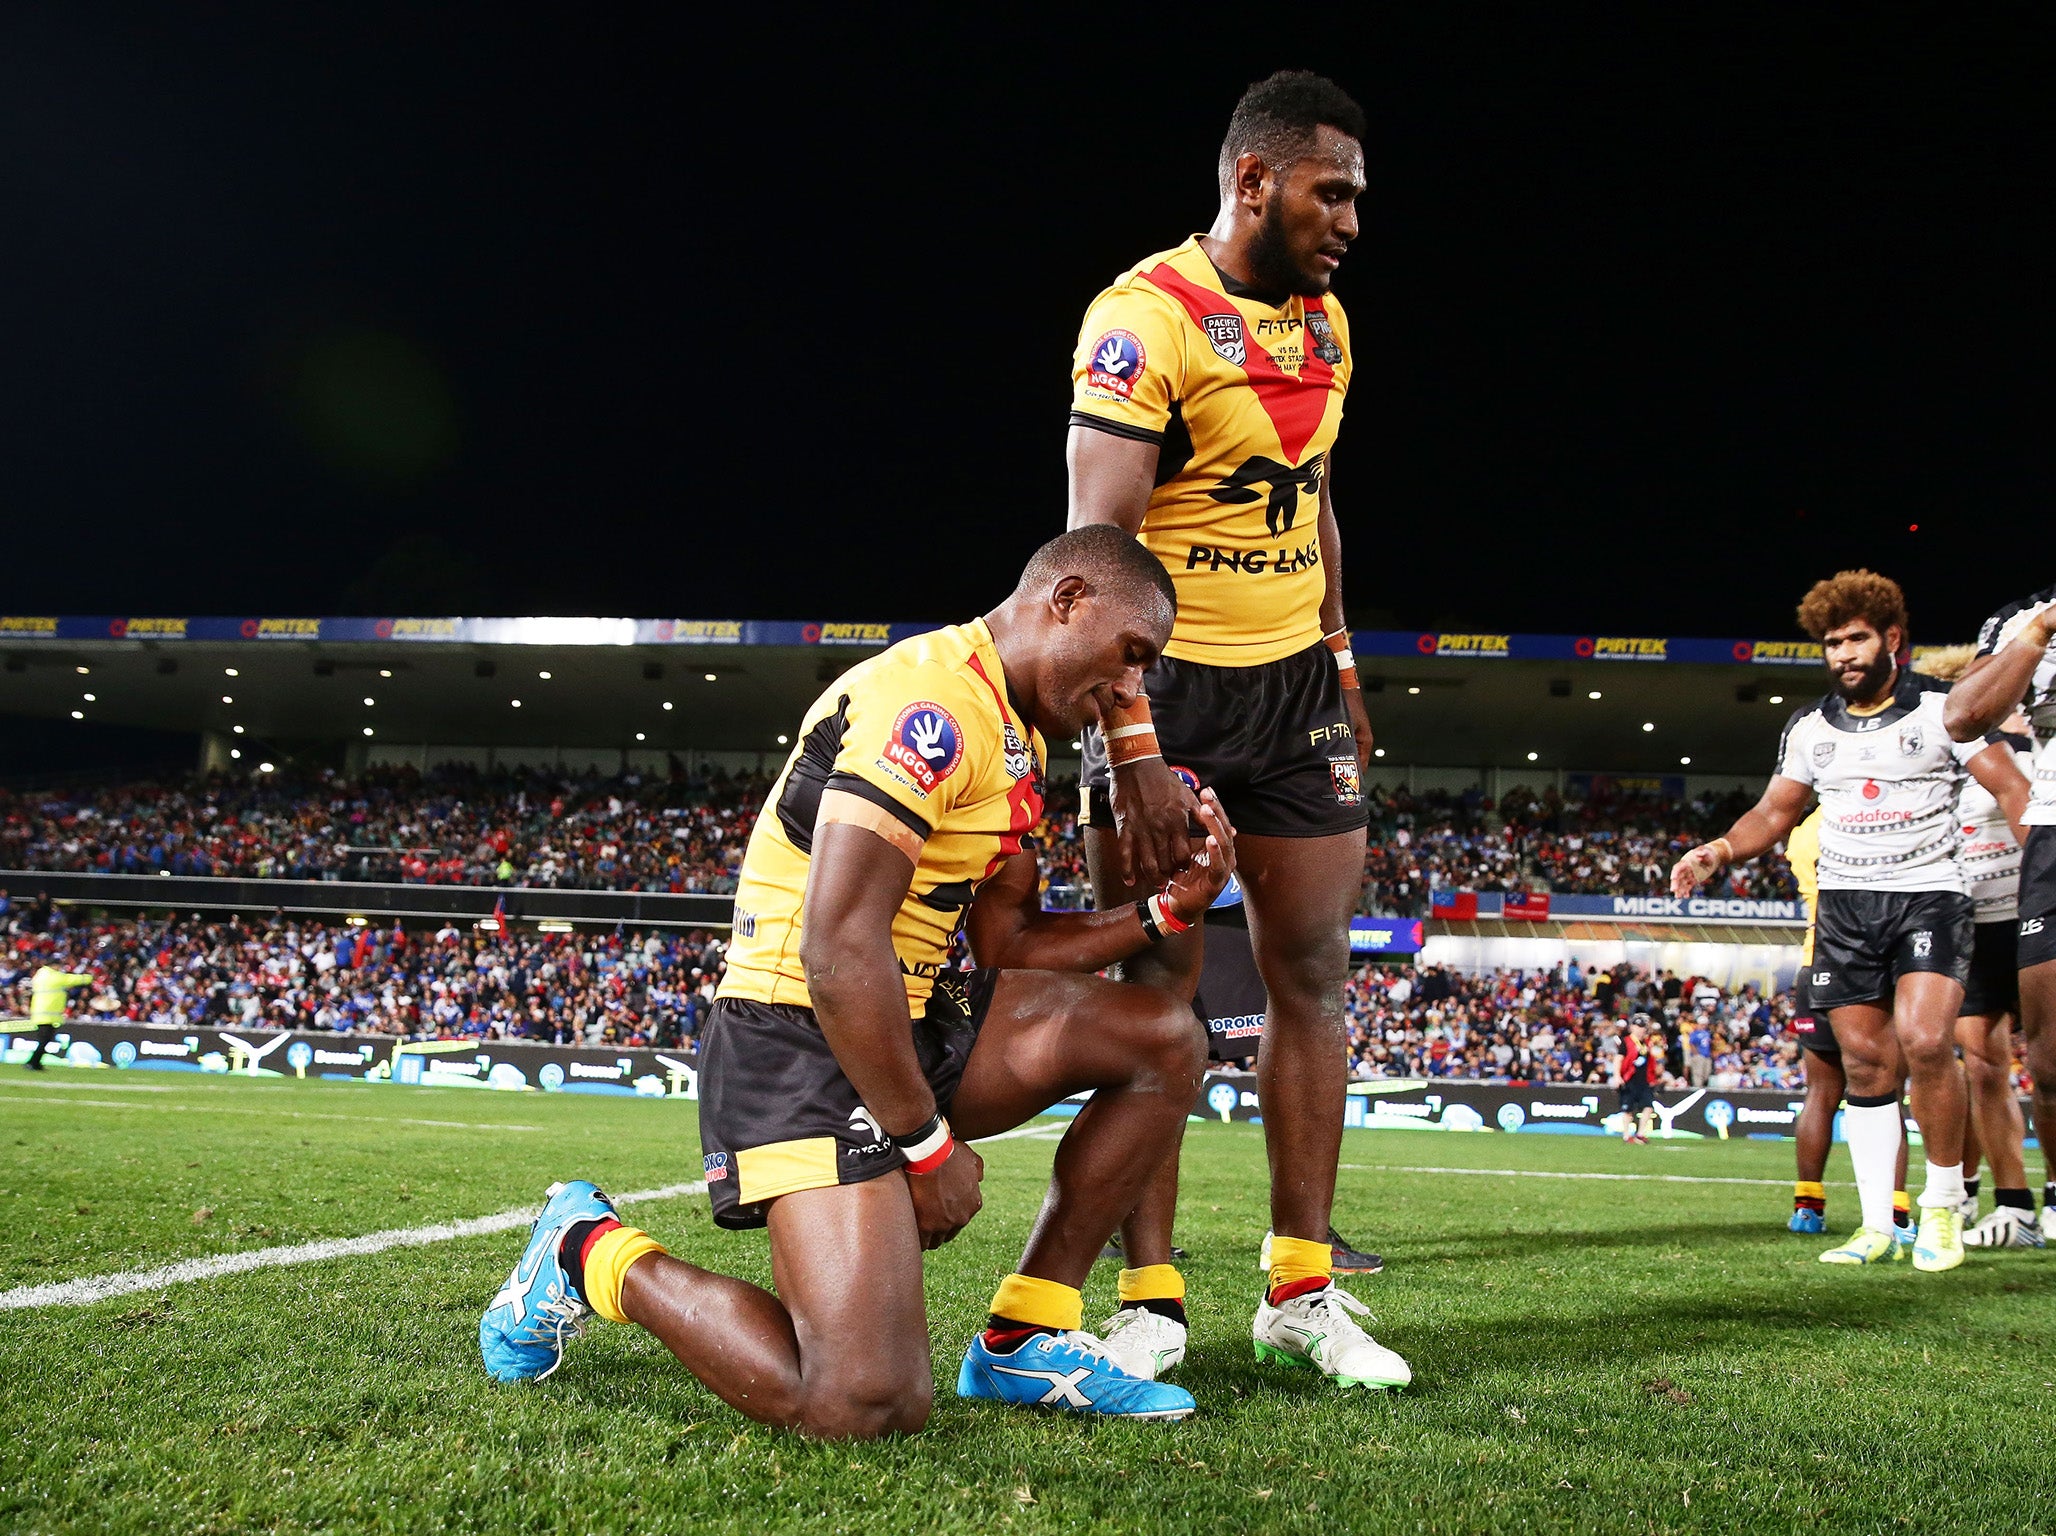 Kato Ottio, standing, played for Papua New Guinea in the Rugby League World Cup